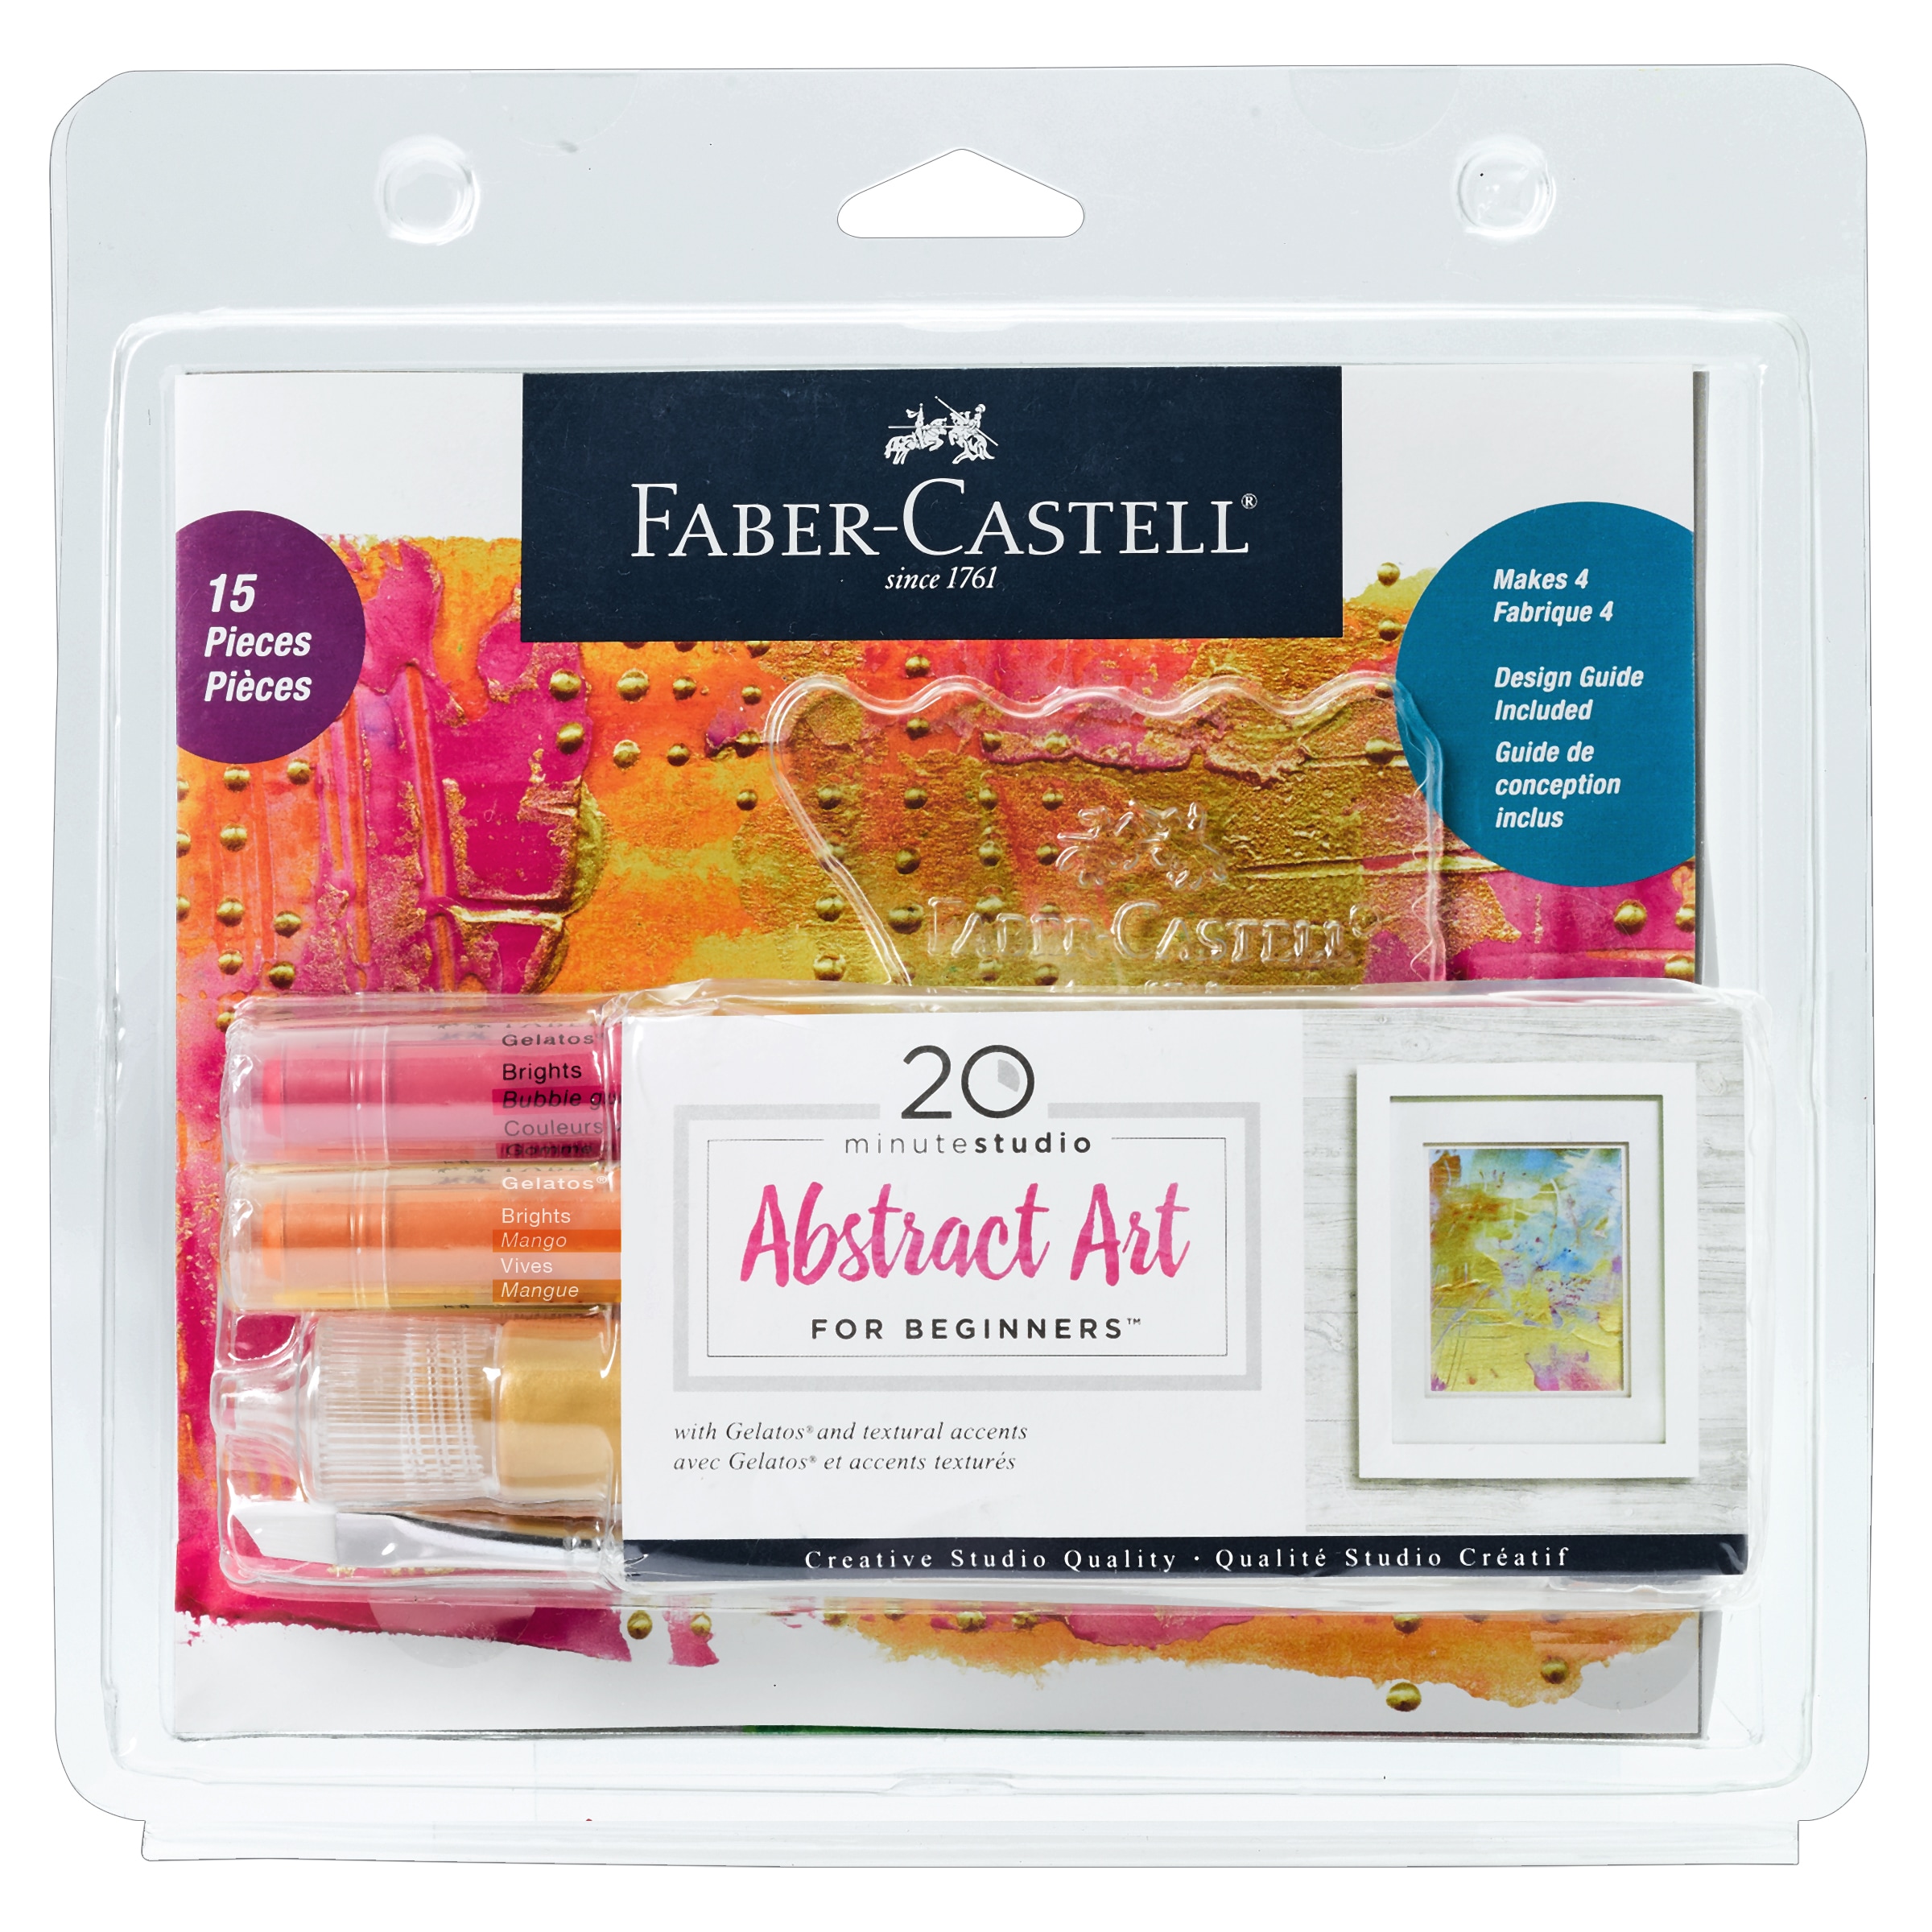 Faber-Castell Creating with Gelatos Art & Craft Kit - Includes 10